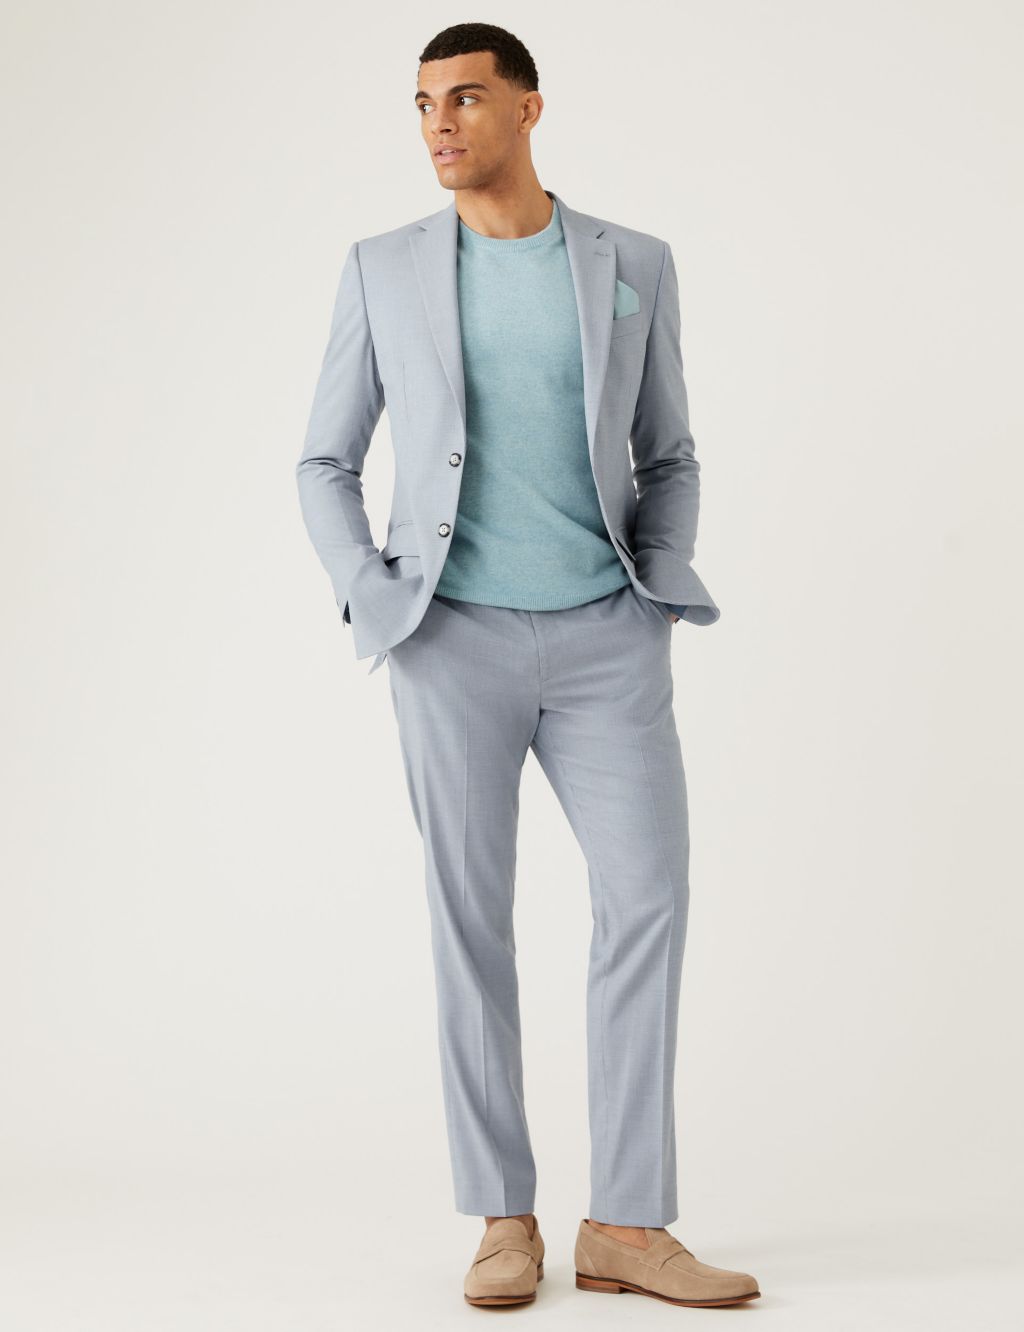 Slim Fit Micro Puppytooth Suit Jacket image 7